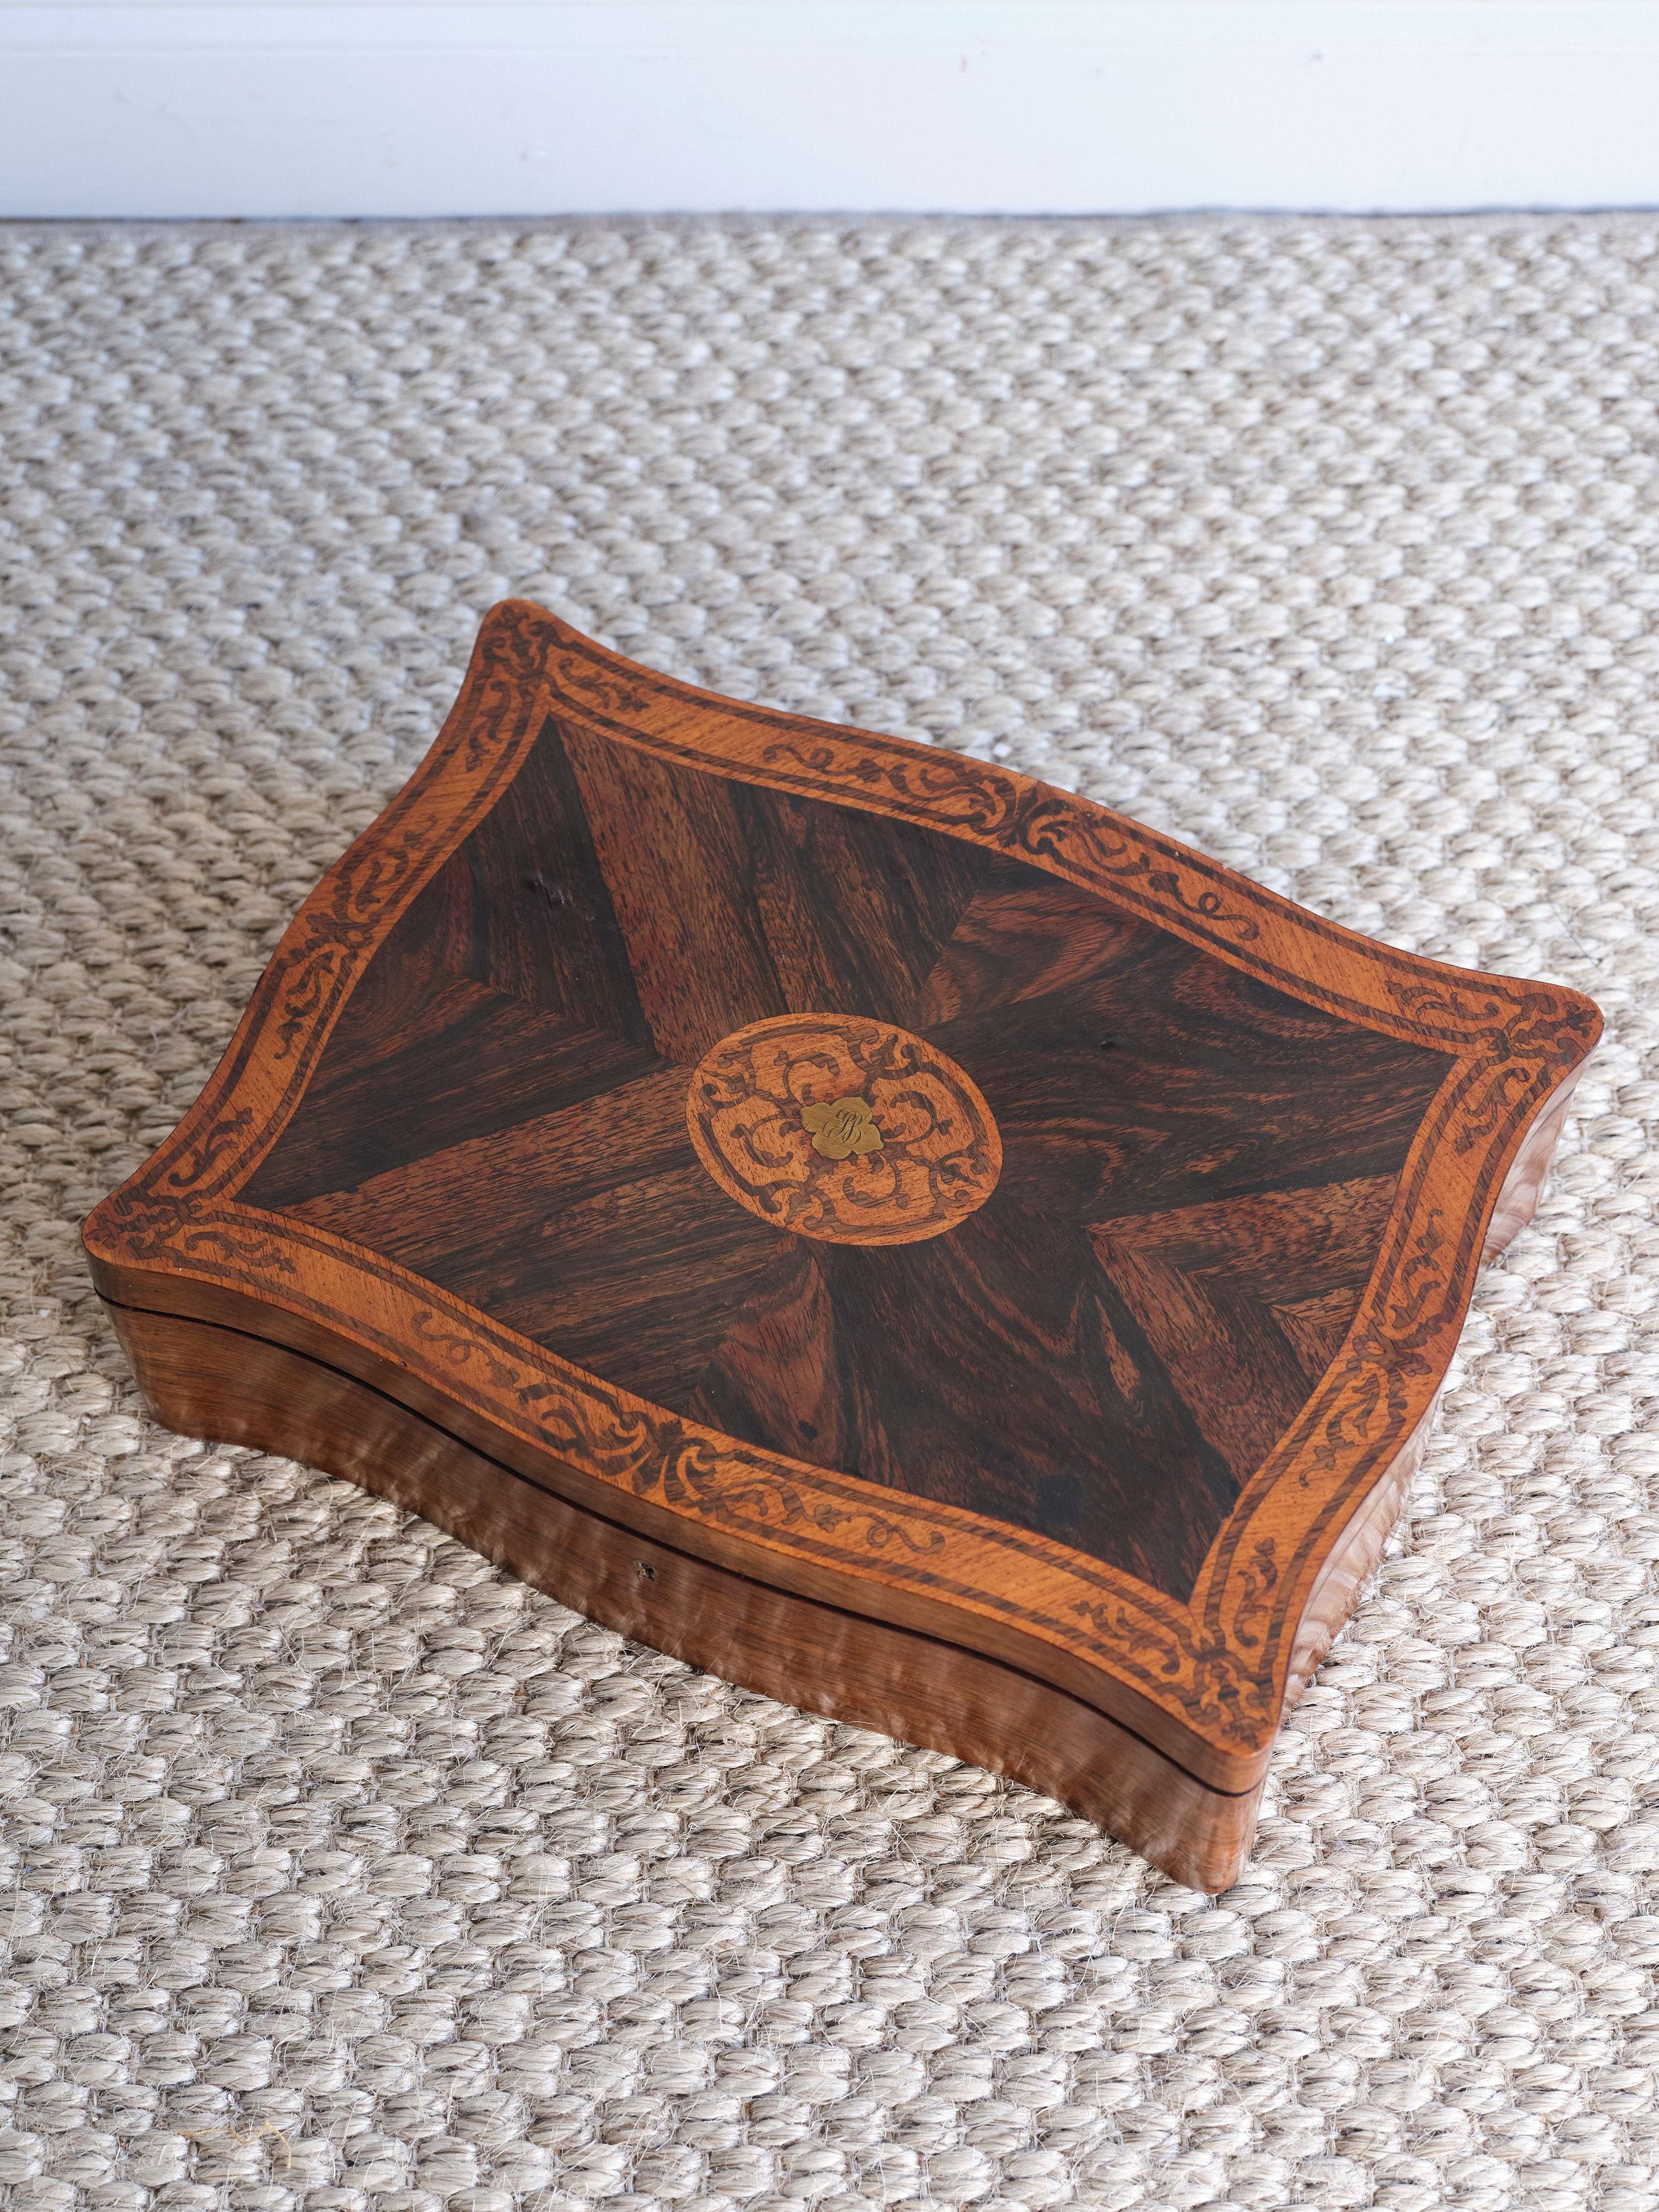 This beautiful hand inlaid box has so many unique details and the high quality workmanship is evident. There are curves along each side of the box that give it a lovely feel.  It has warm patina stain and is structurally sound. Both of the hinges